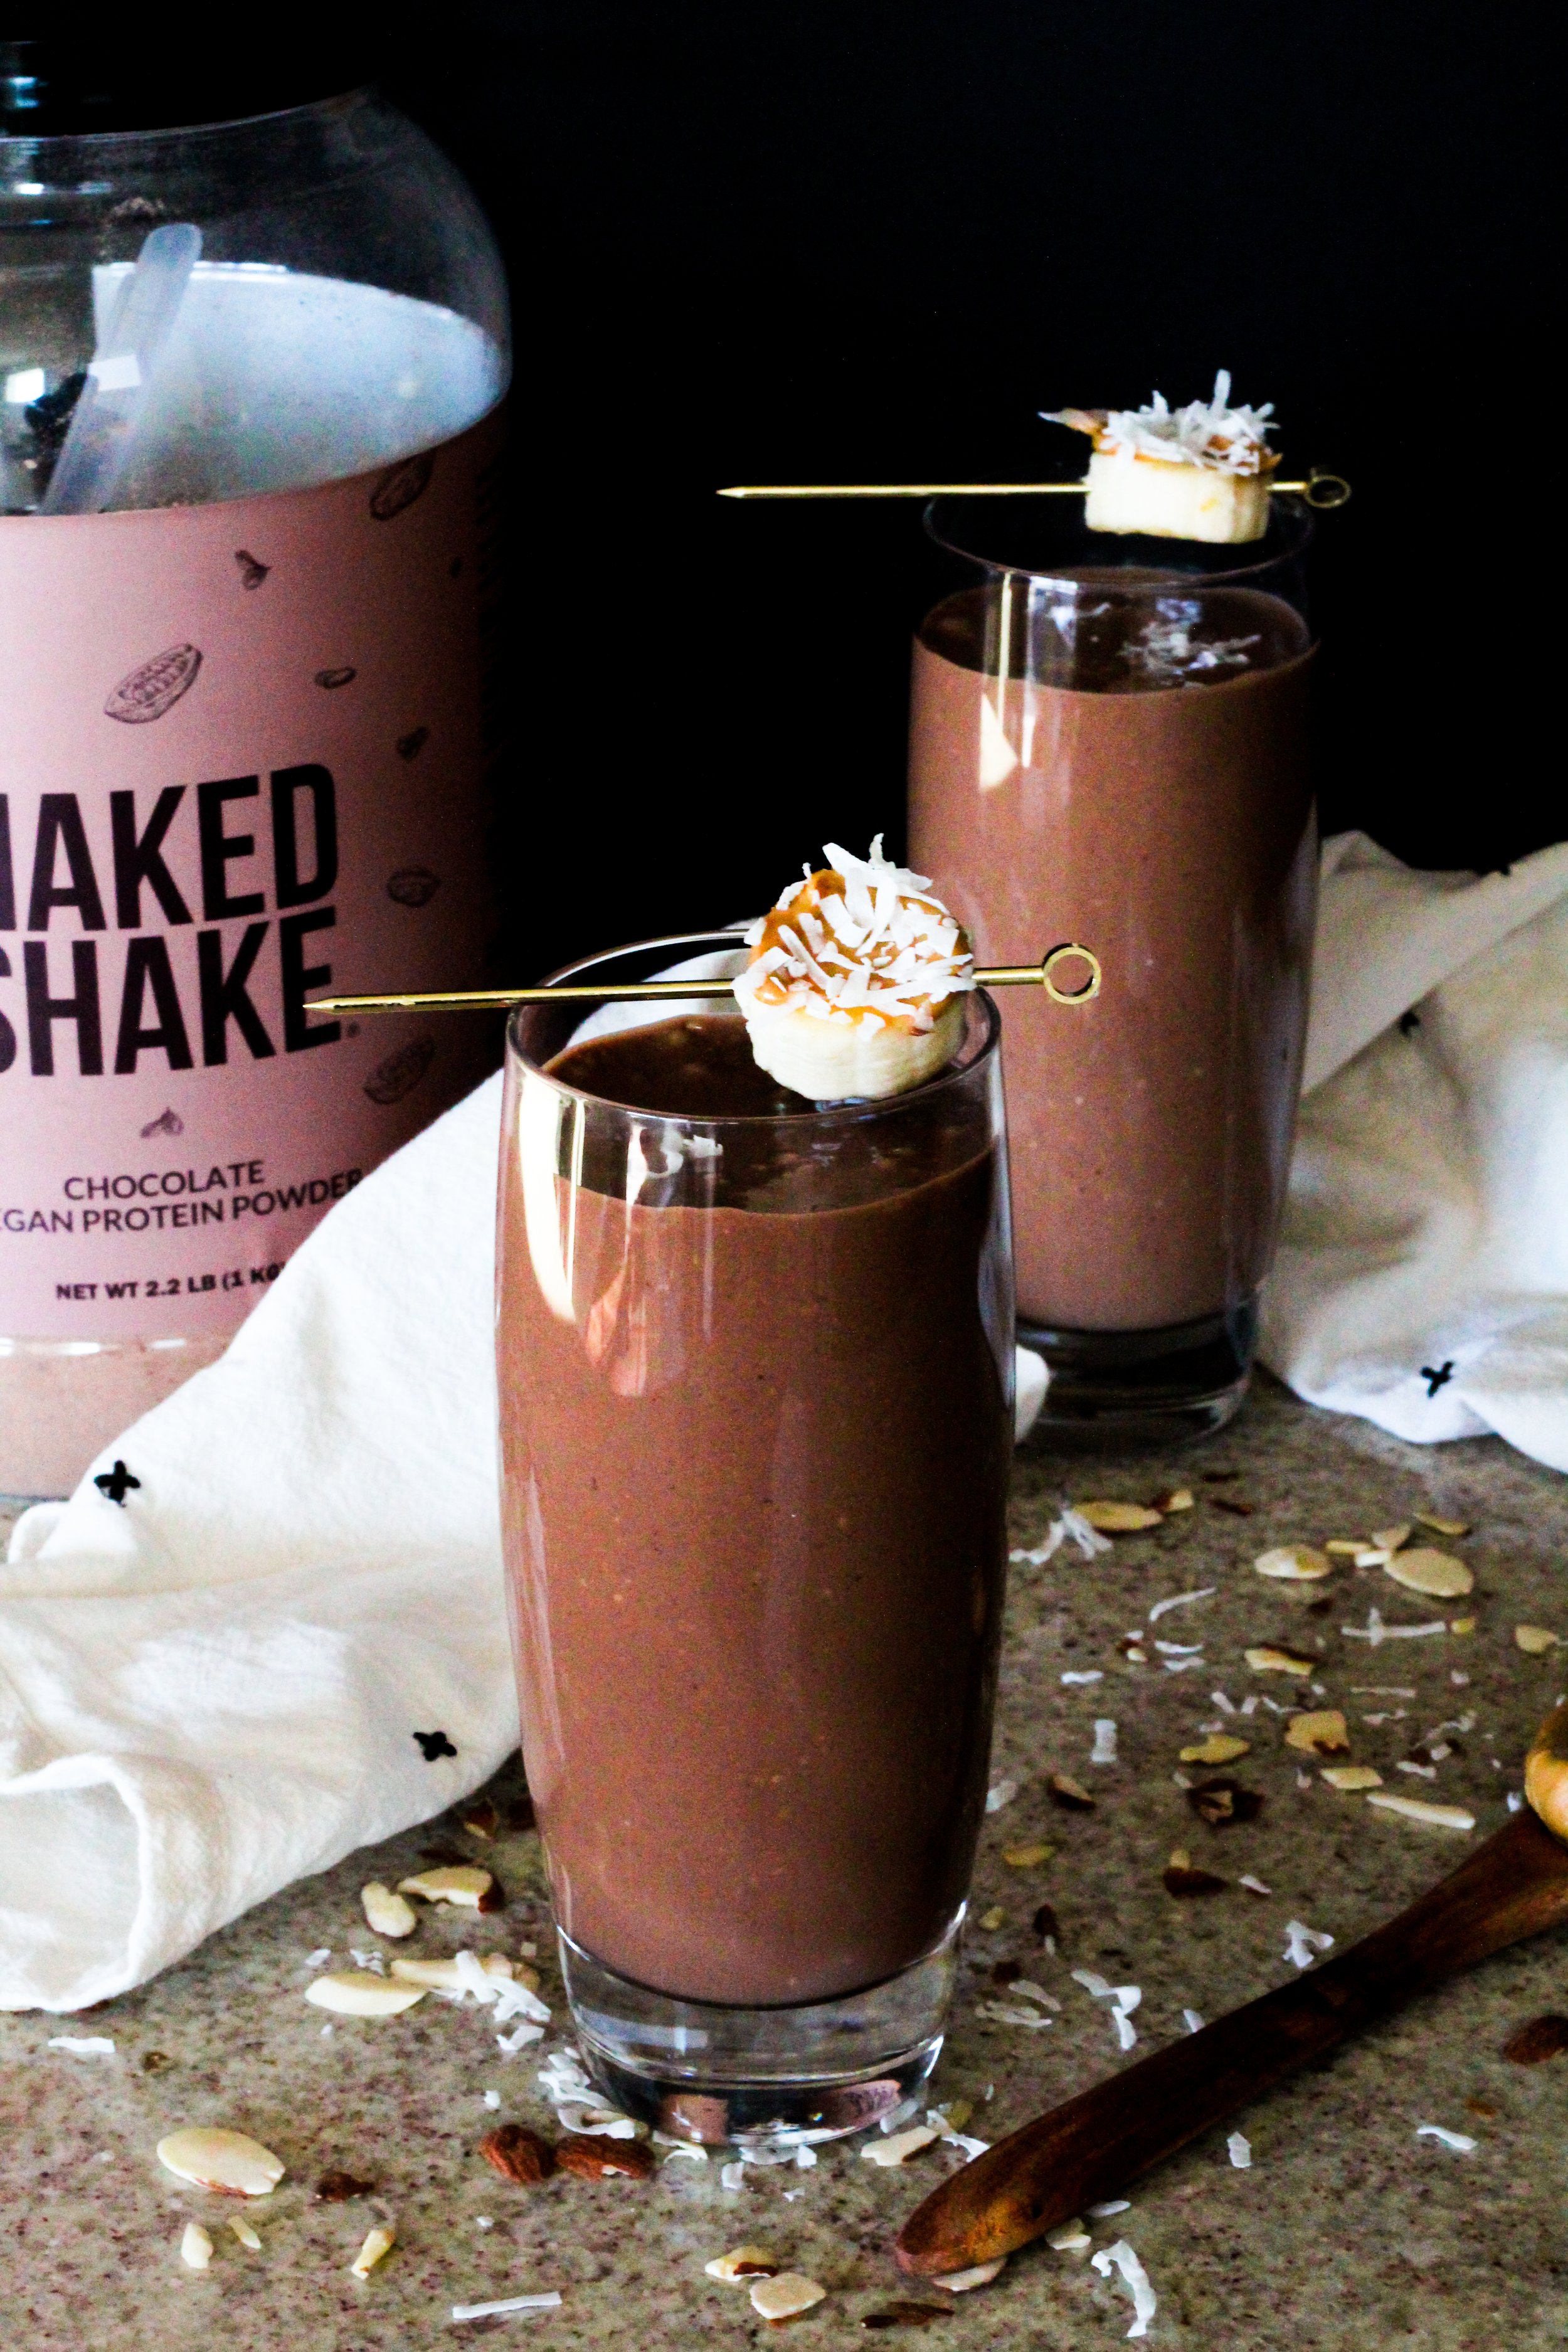 Chocolate Coconut Almond Protein Shake | Naked Shake - 30 Servings